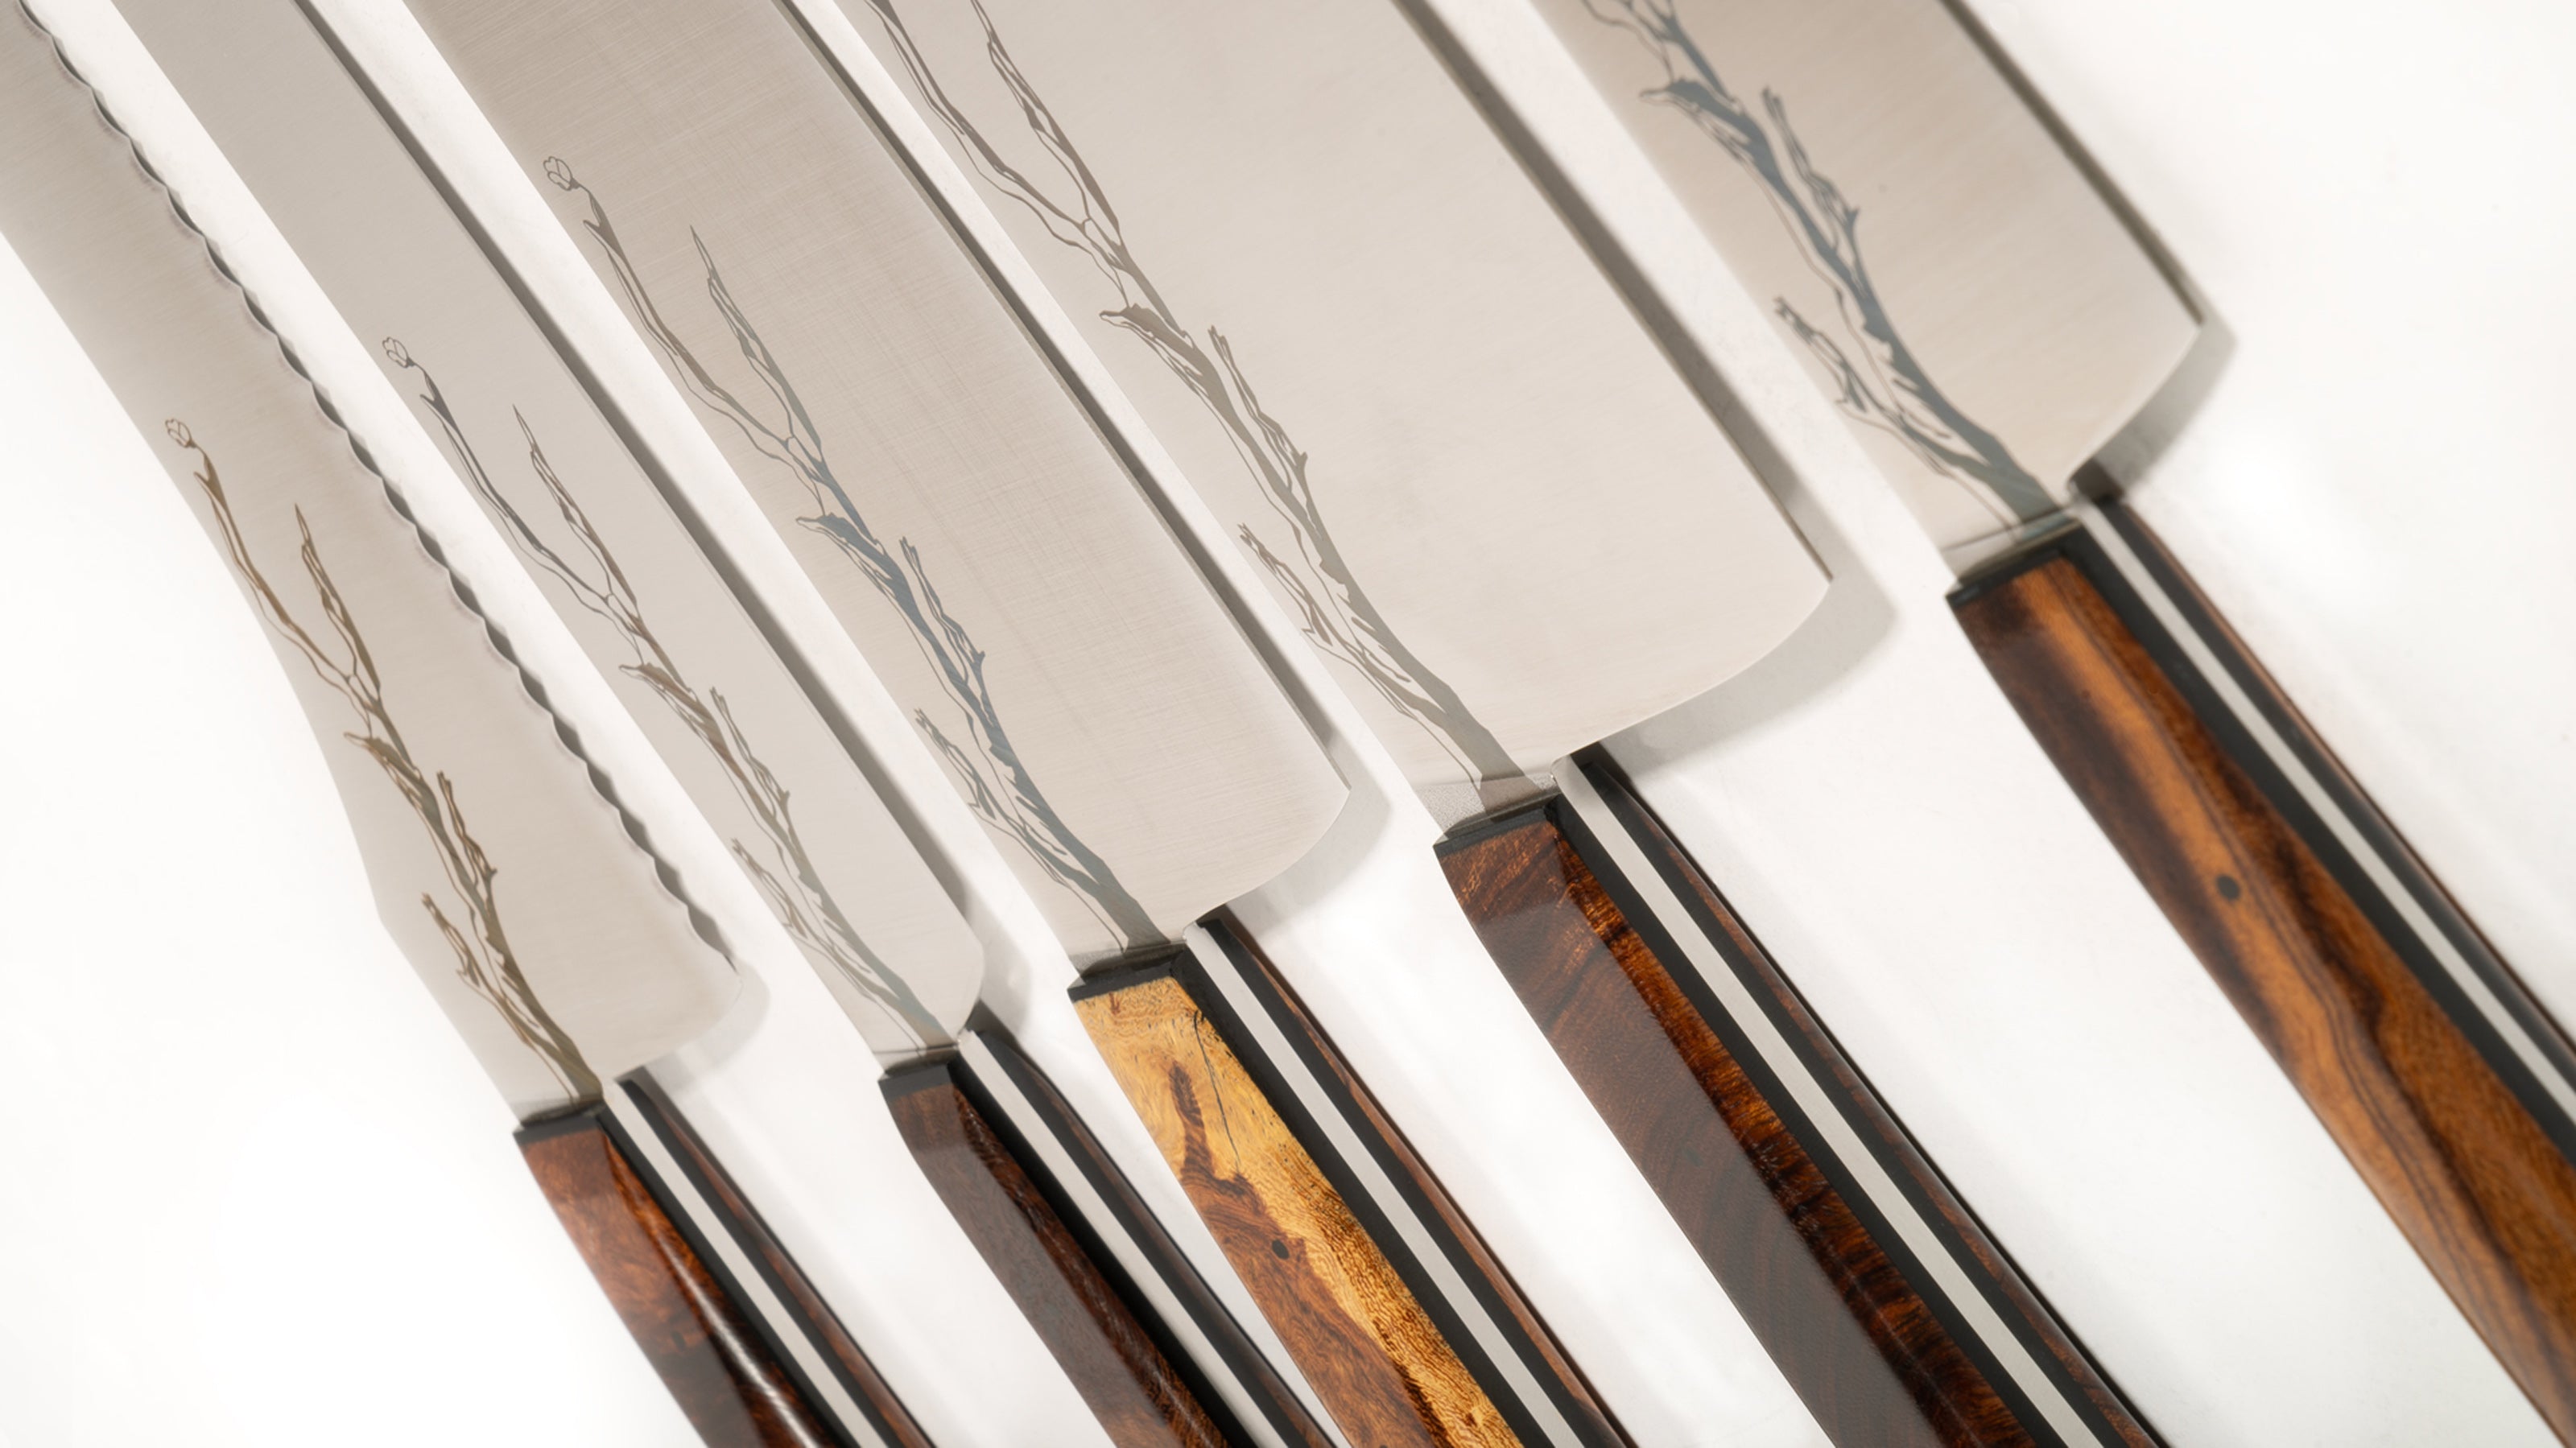 Close-up detail photo of Town Cutler Olneya Kitchen Knives with engraving of Desert Ironwood tree branch.